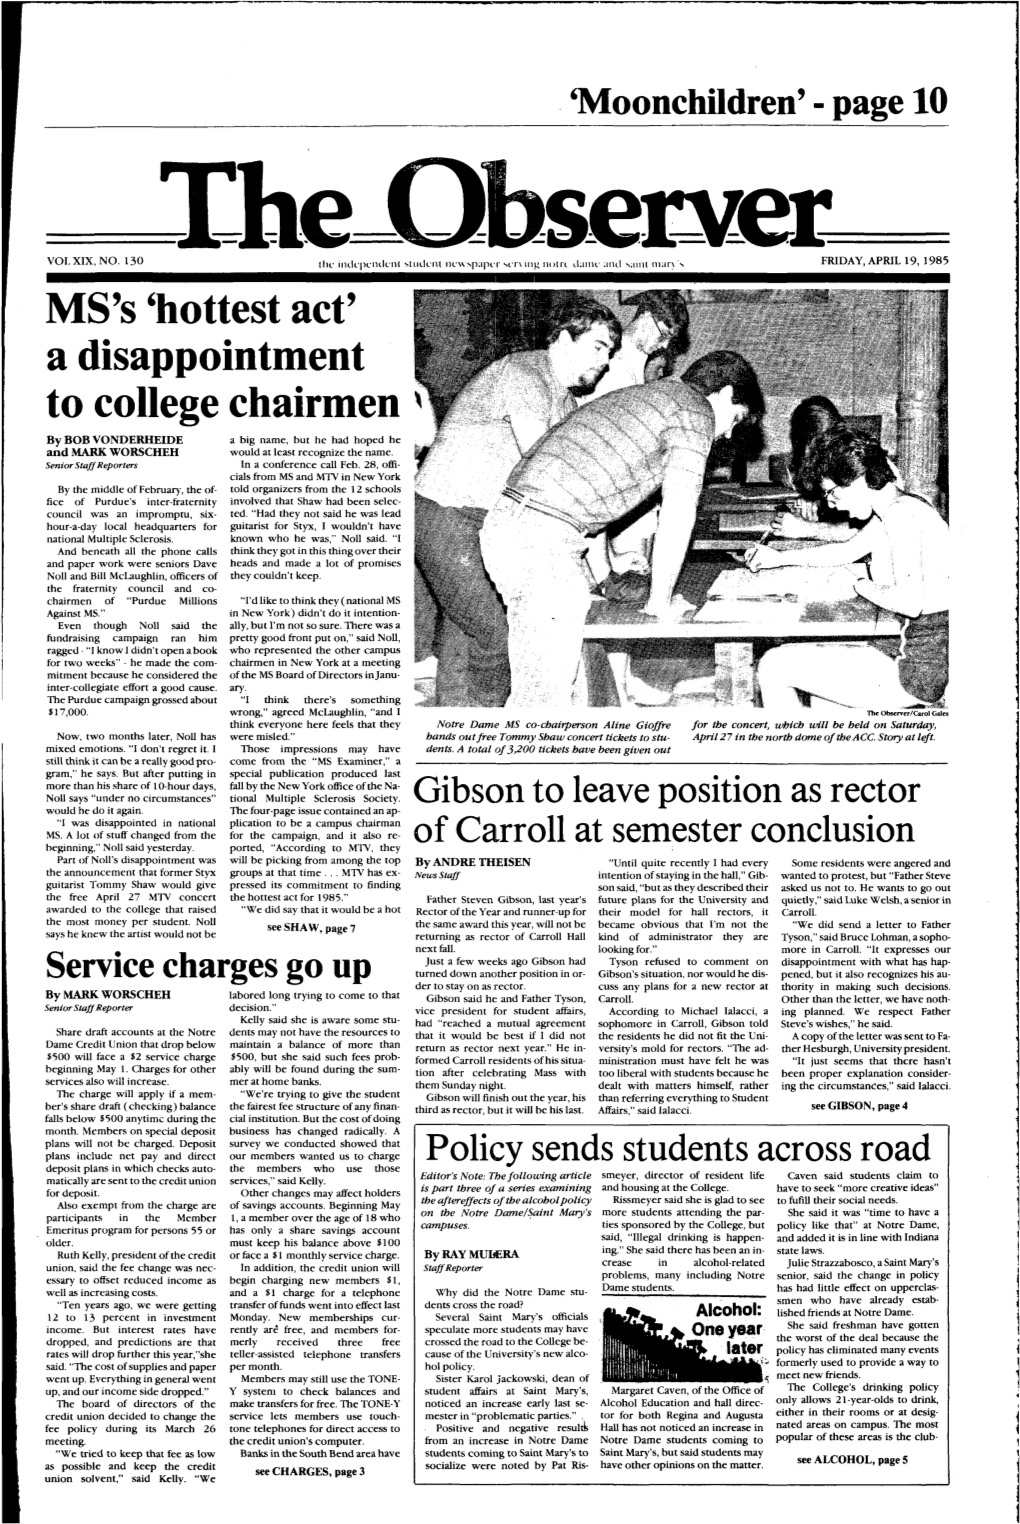 MS's 'Hottest Act' a Disappointment to College Chairmen by BOB VONDERHEIDE a Big Name, but He Had Hoped He and MARK WORSCHEH Would at Least Recognize the Name